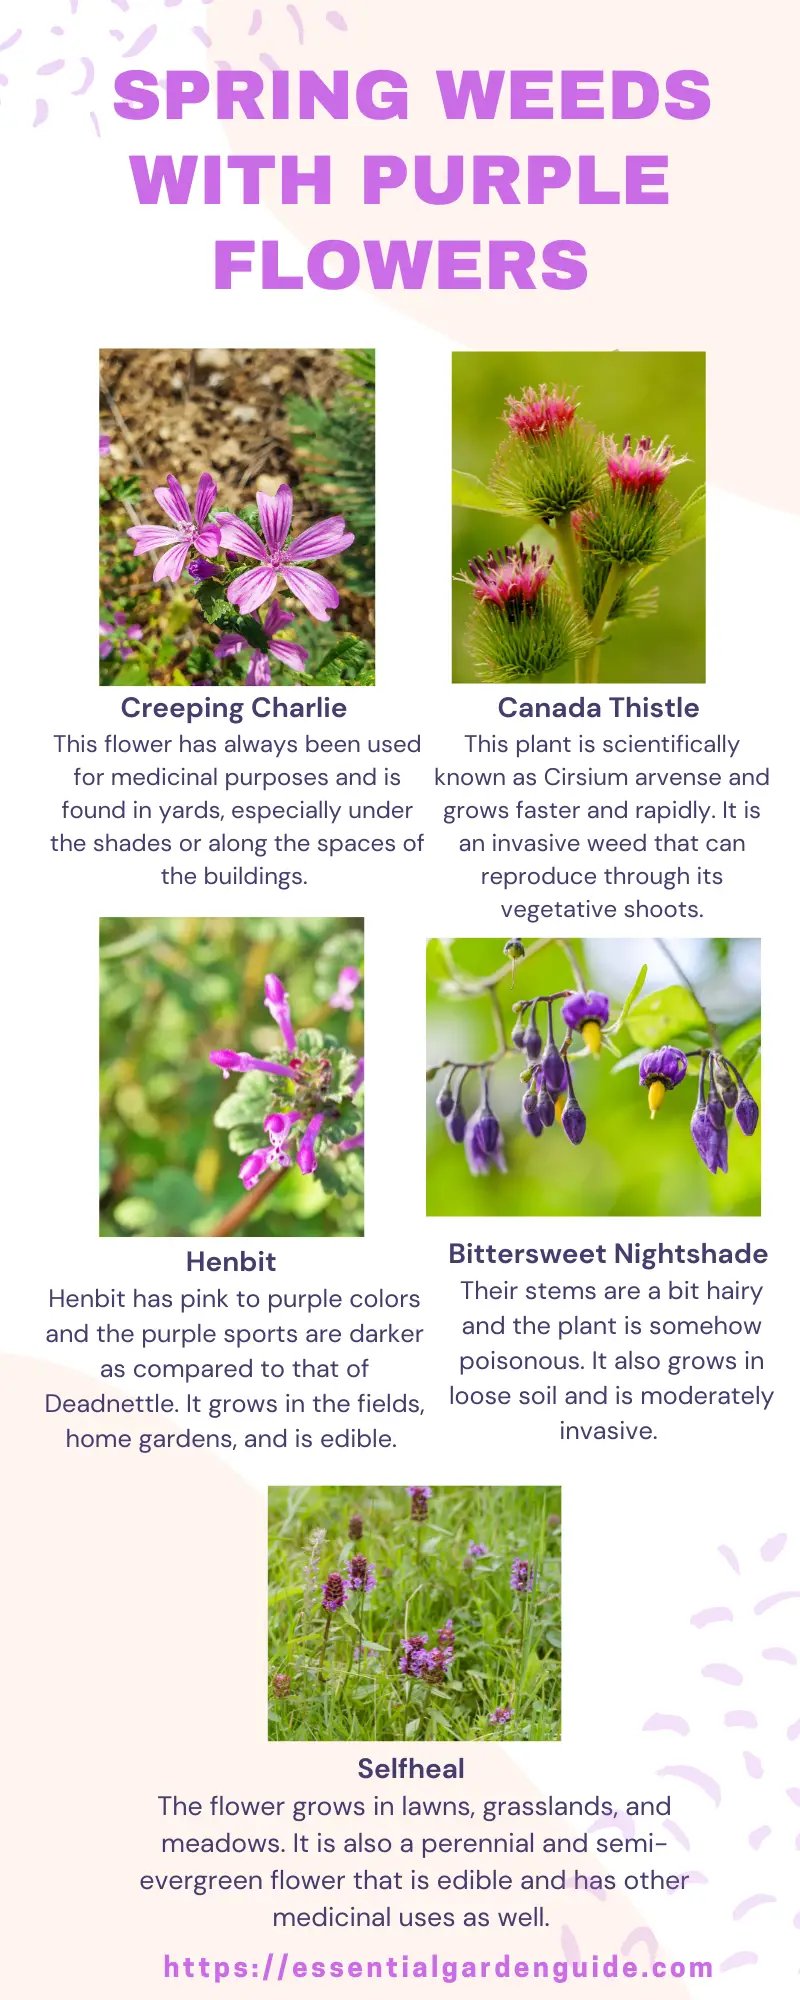 Infographic - What are those purple weeds called?